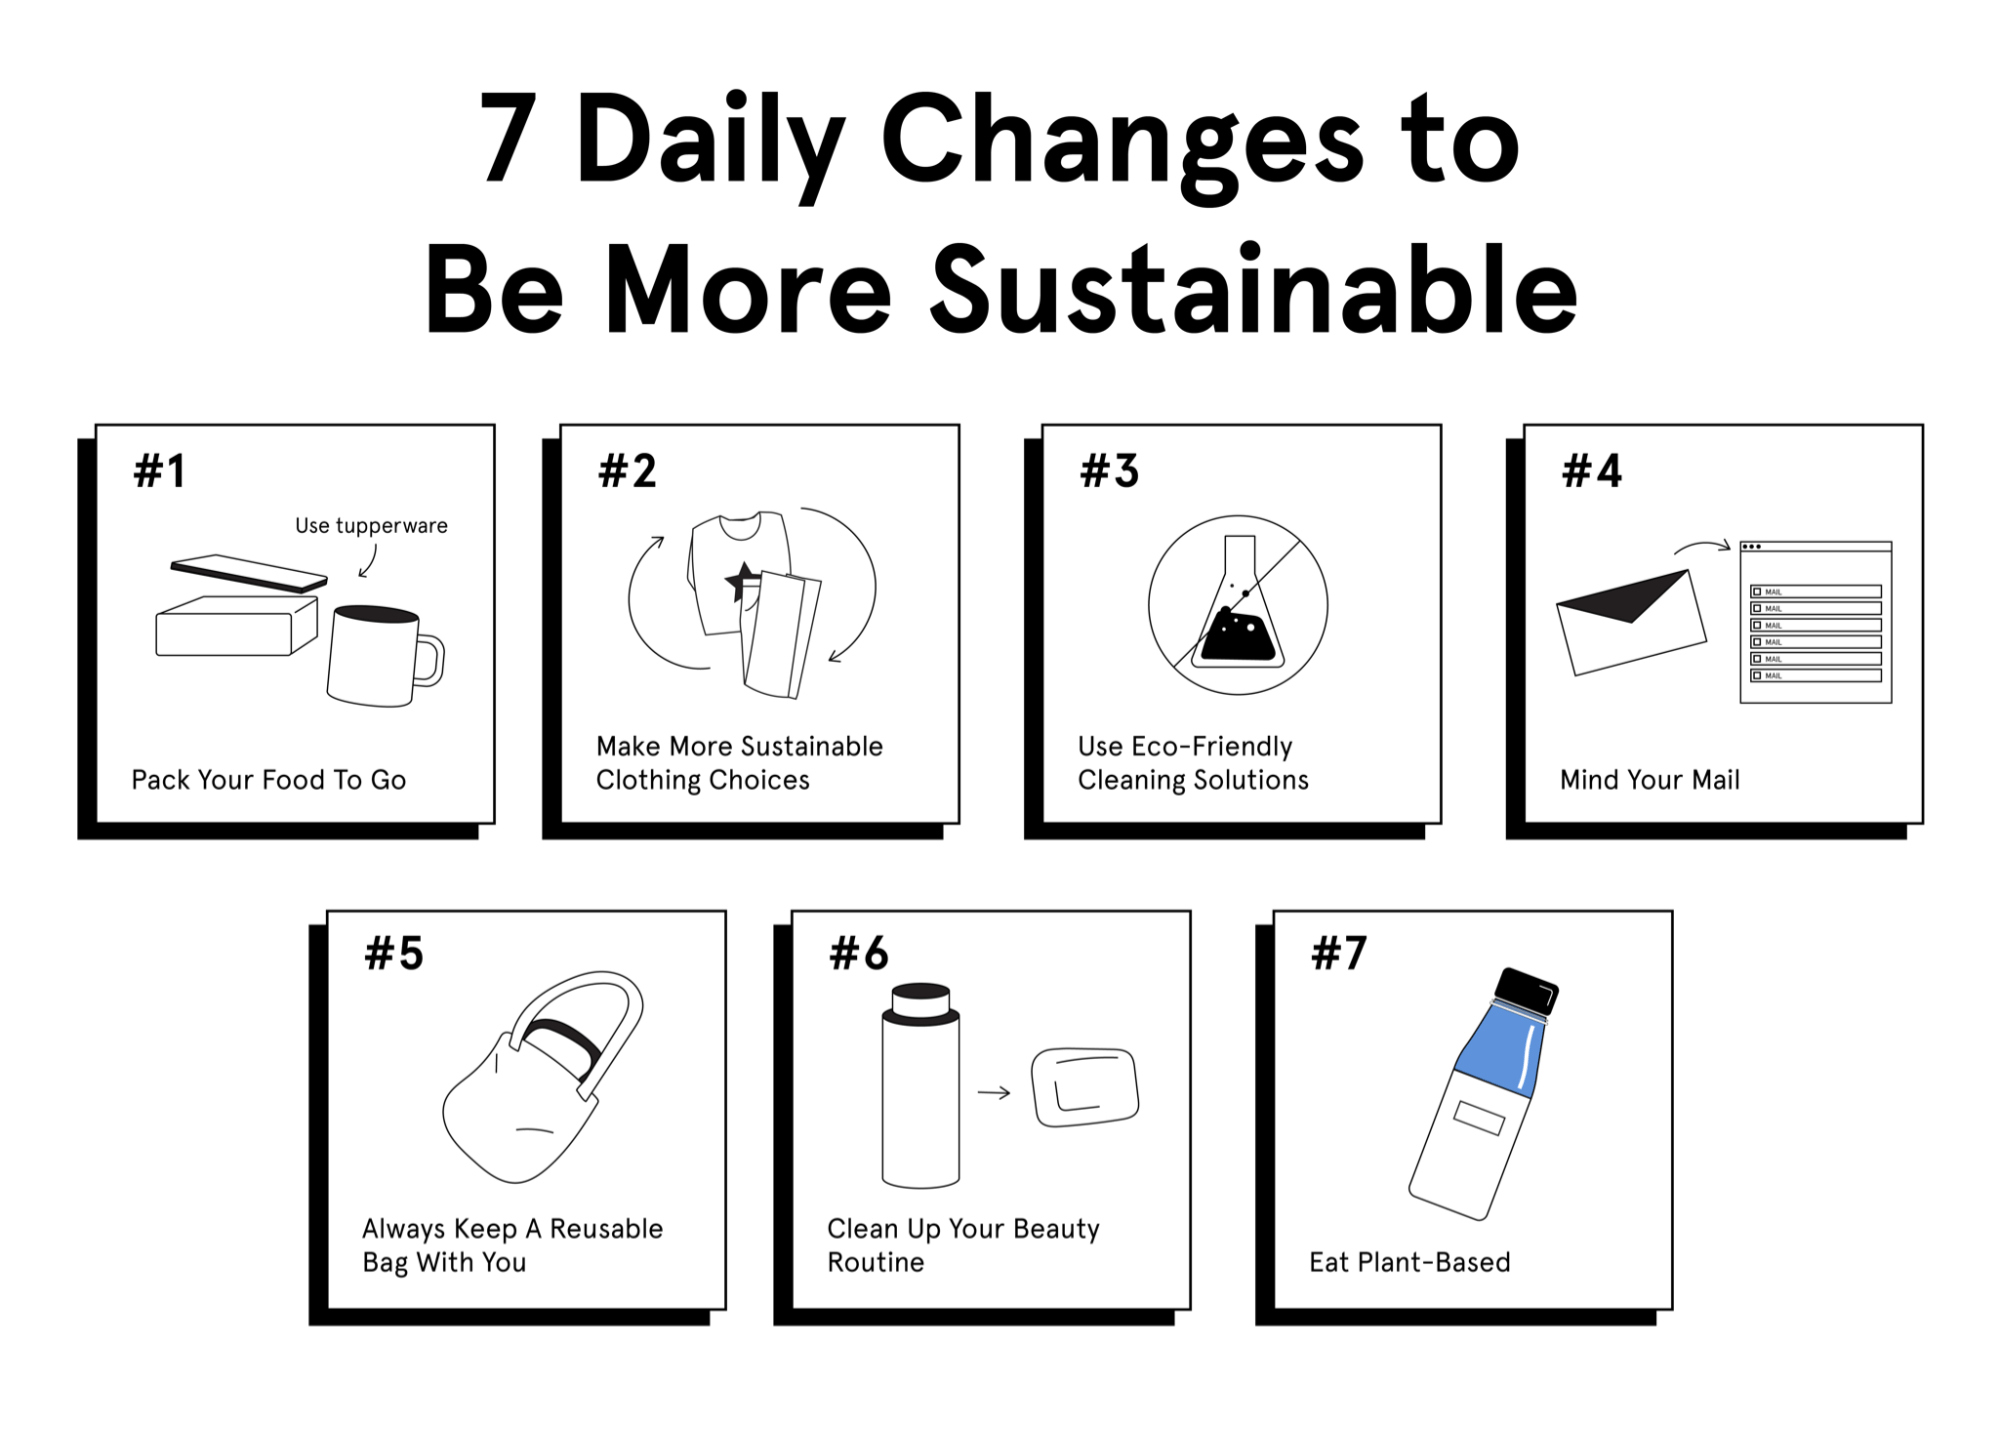 7 Daily Changes to be more sustainable infographic by Soylent